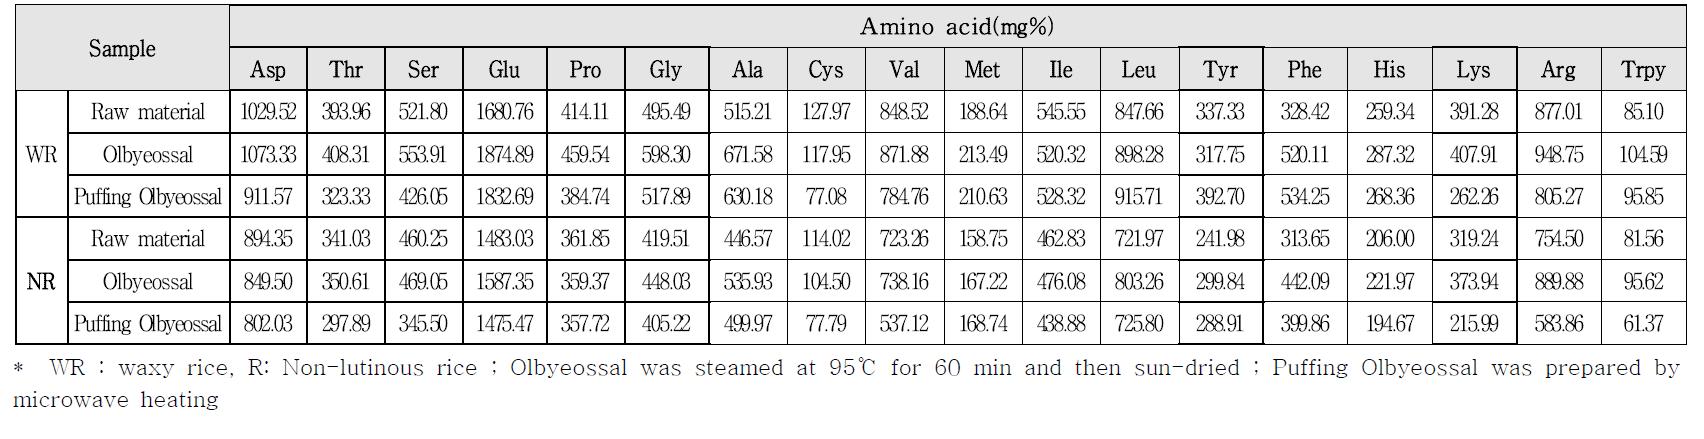 Comparison on amino acid contents of rough rice, Olbyeossal and Puffing Olbyeossal by microwave heating